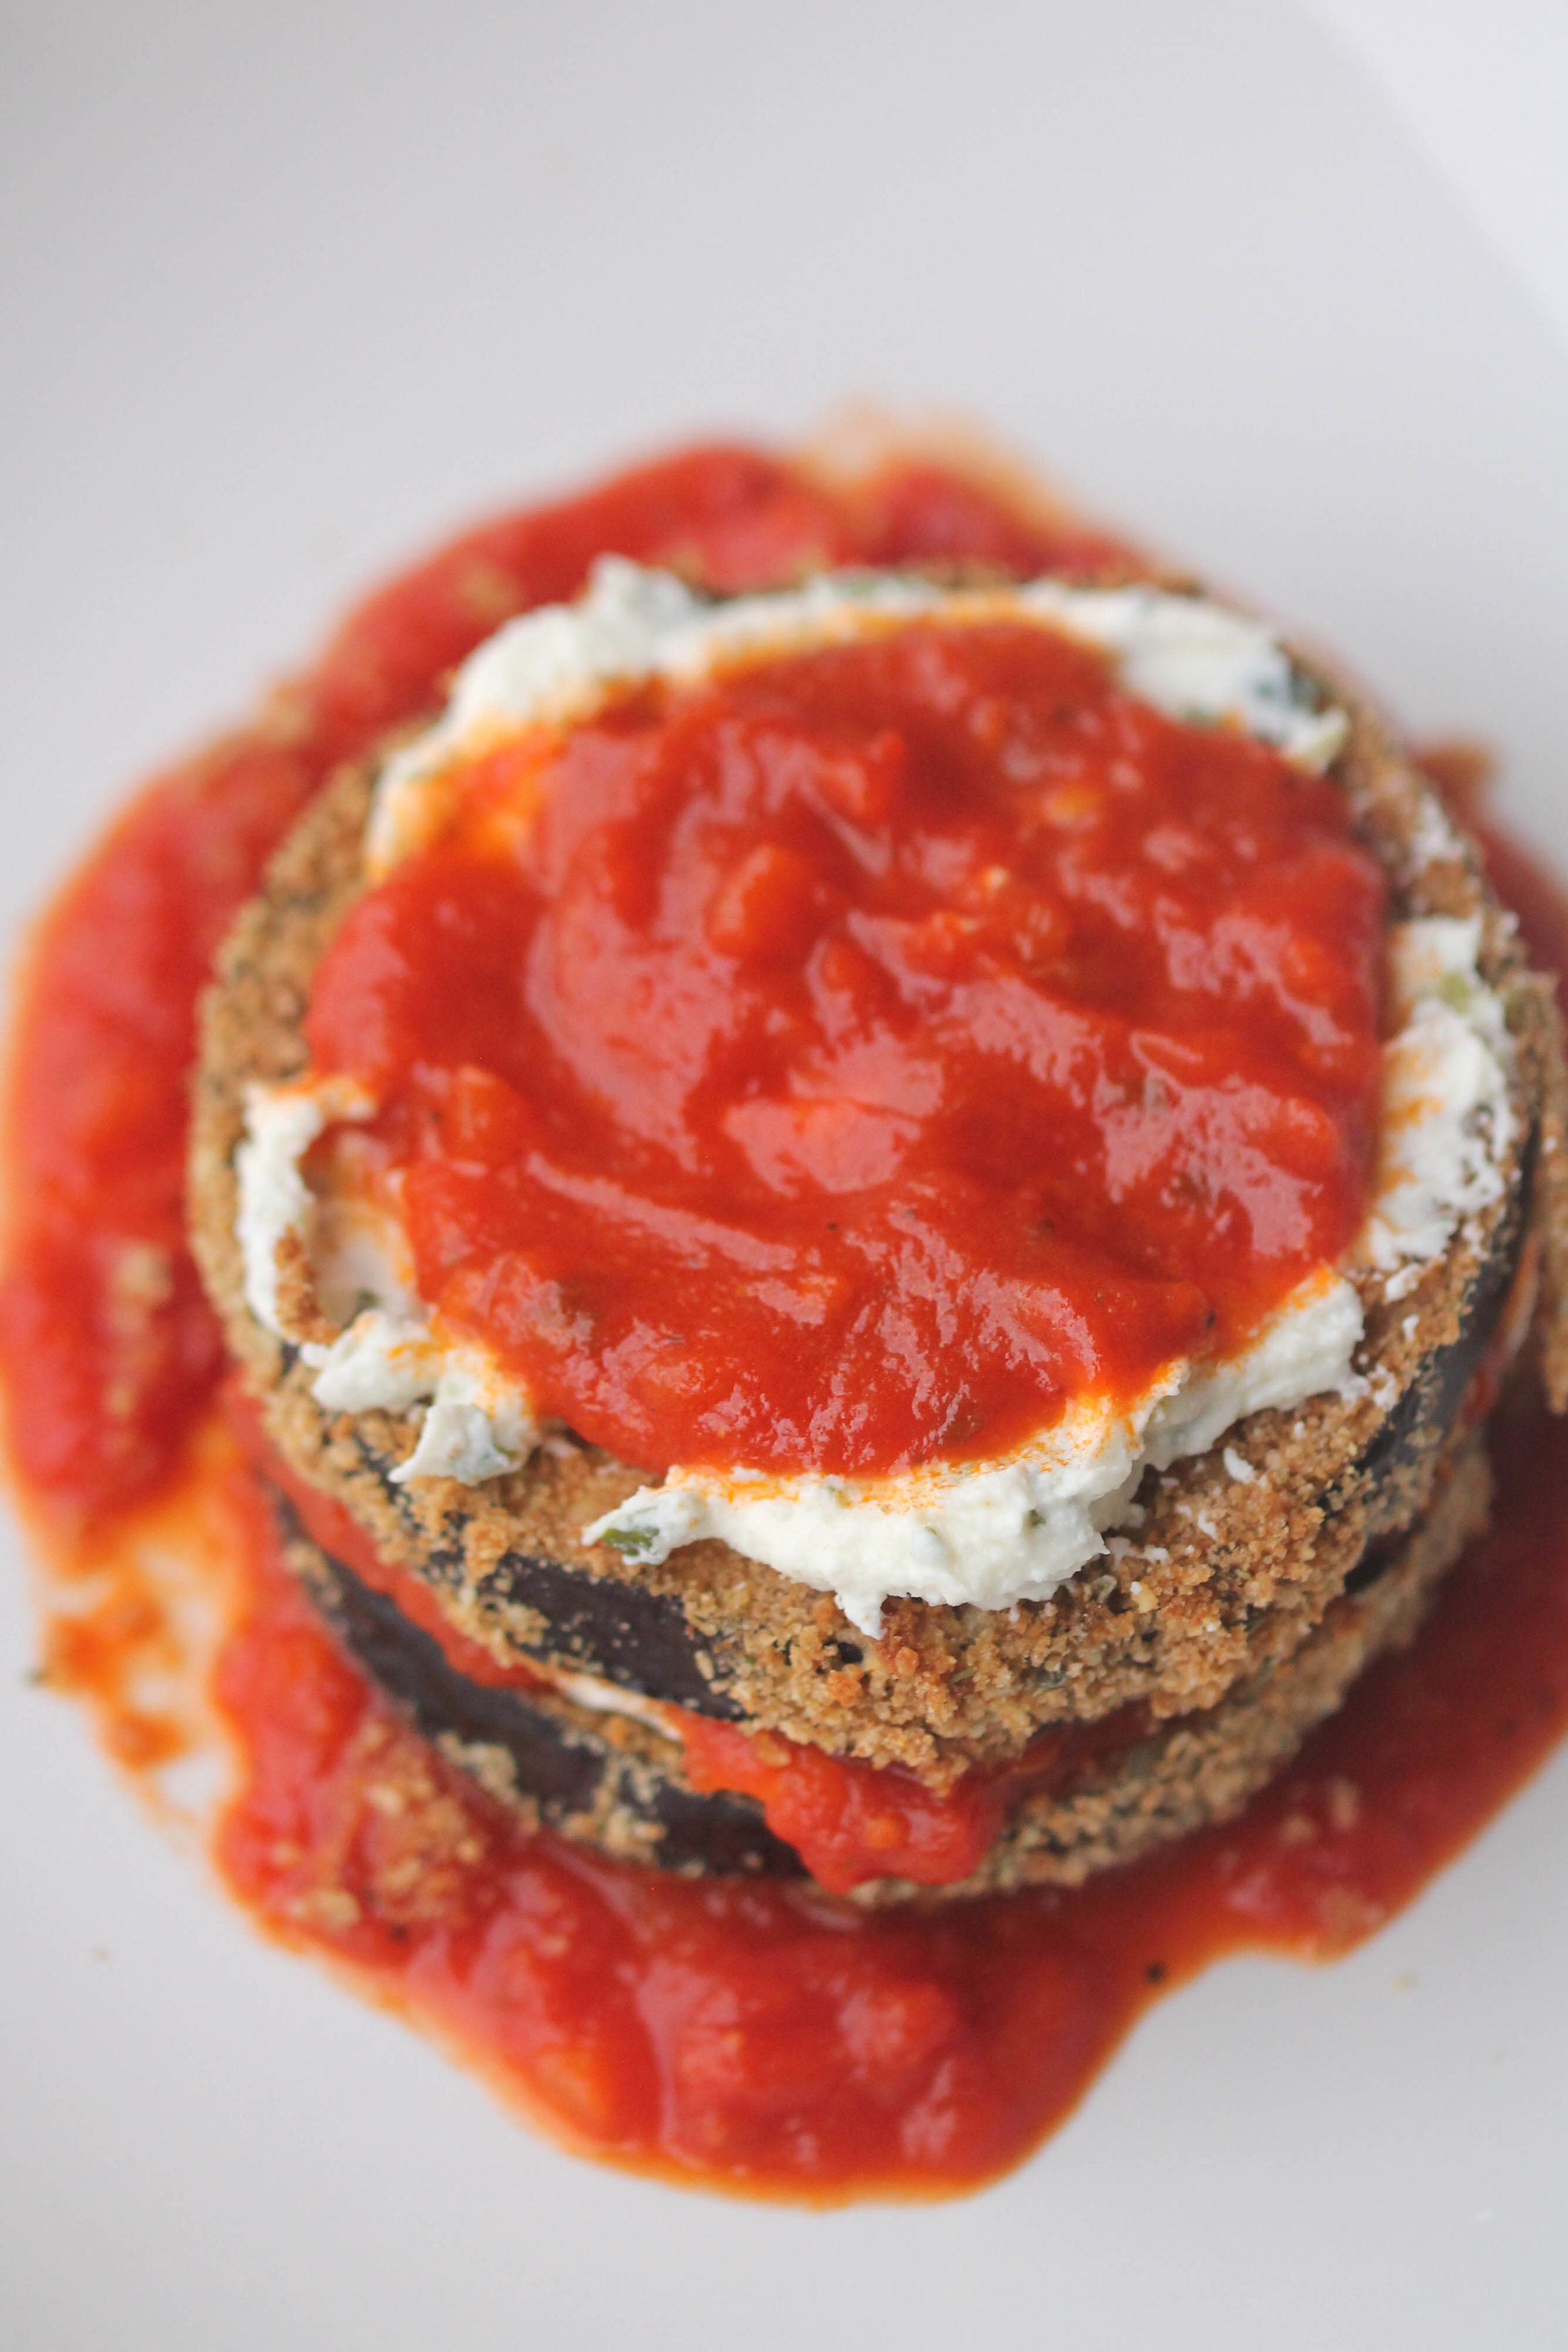 Eggplant Parmesan Stacks vegetarian alternative to chicken parmesan and healthier than your deep-fried eggplant parm.